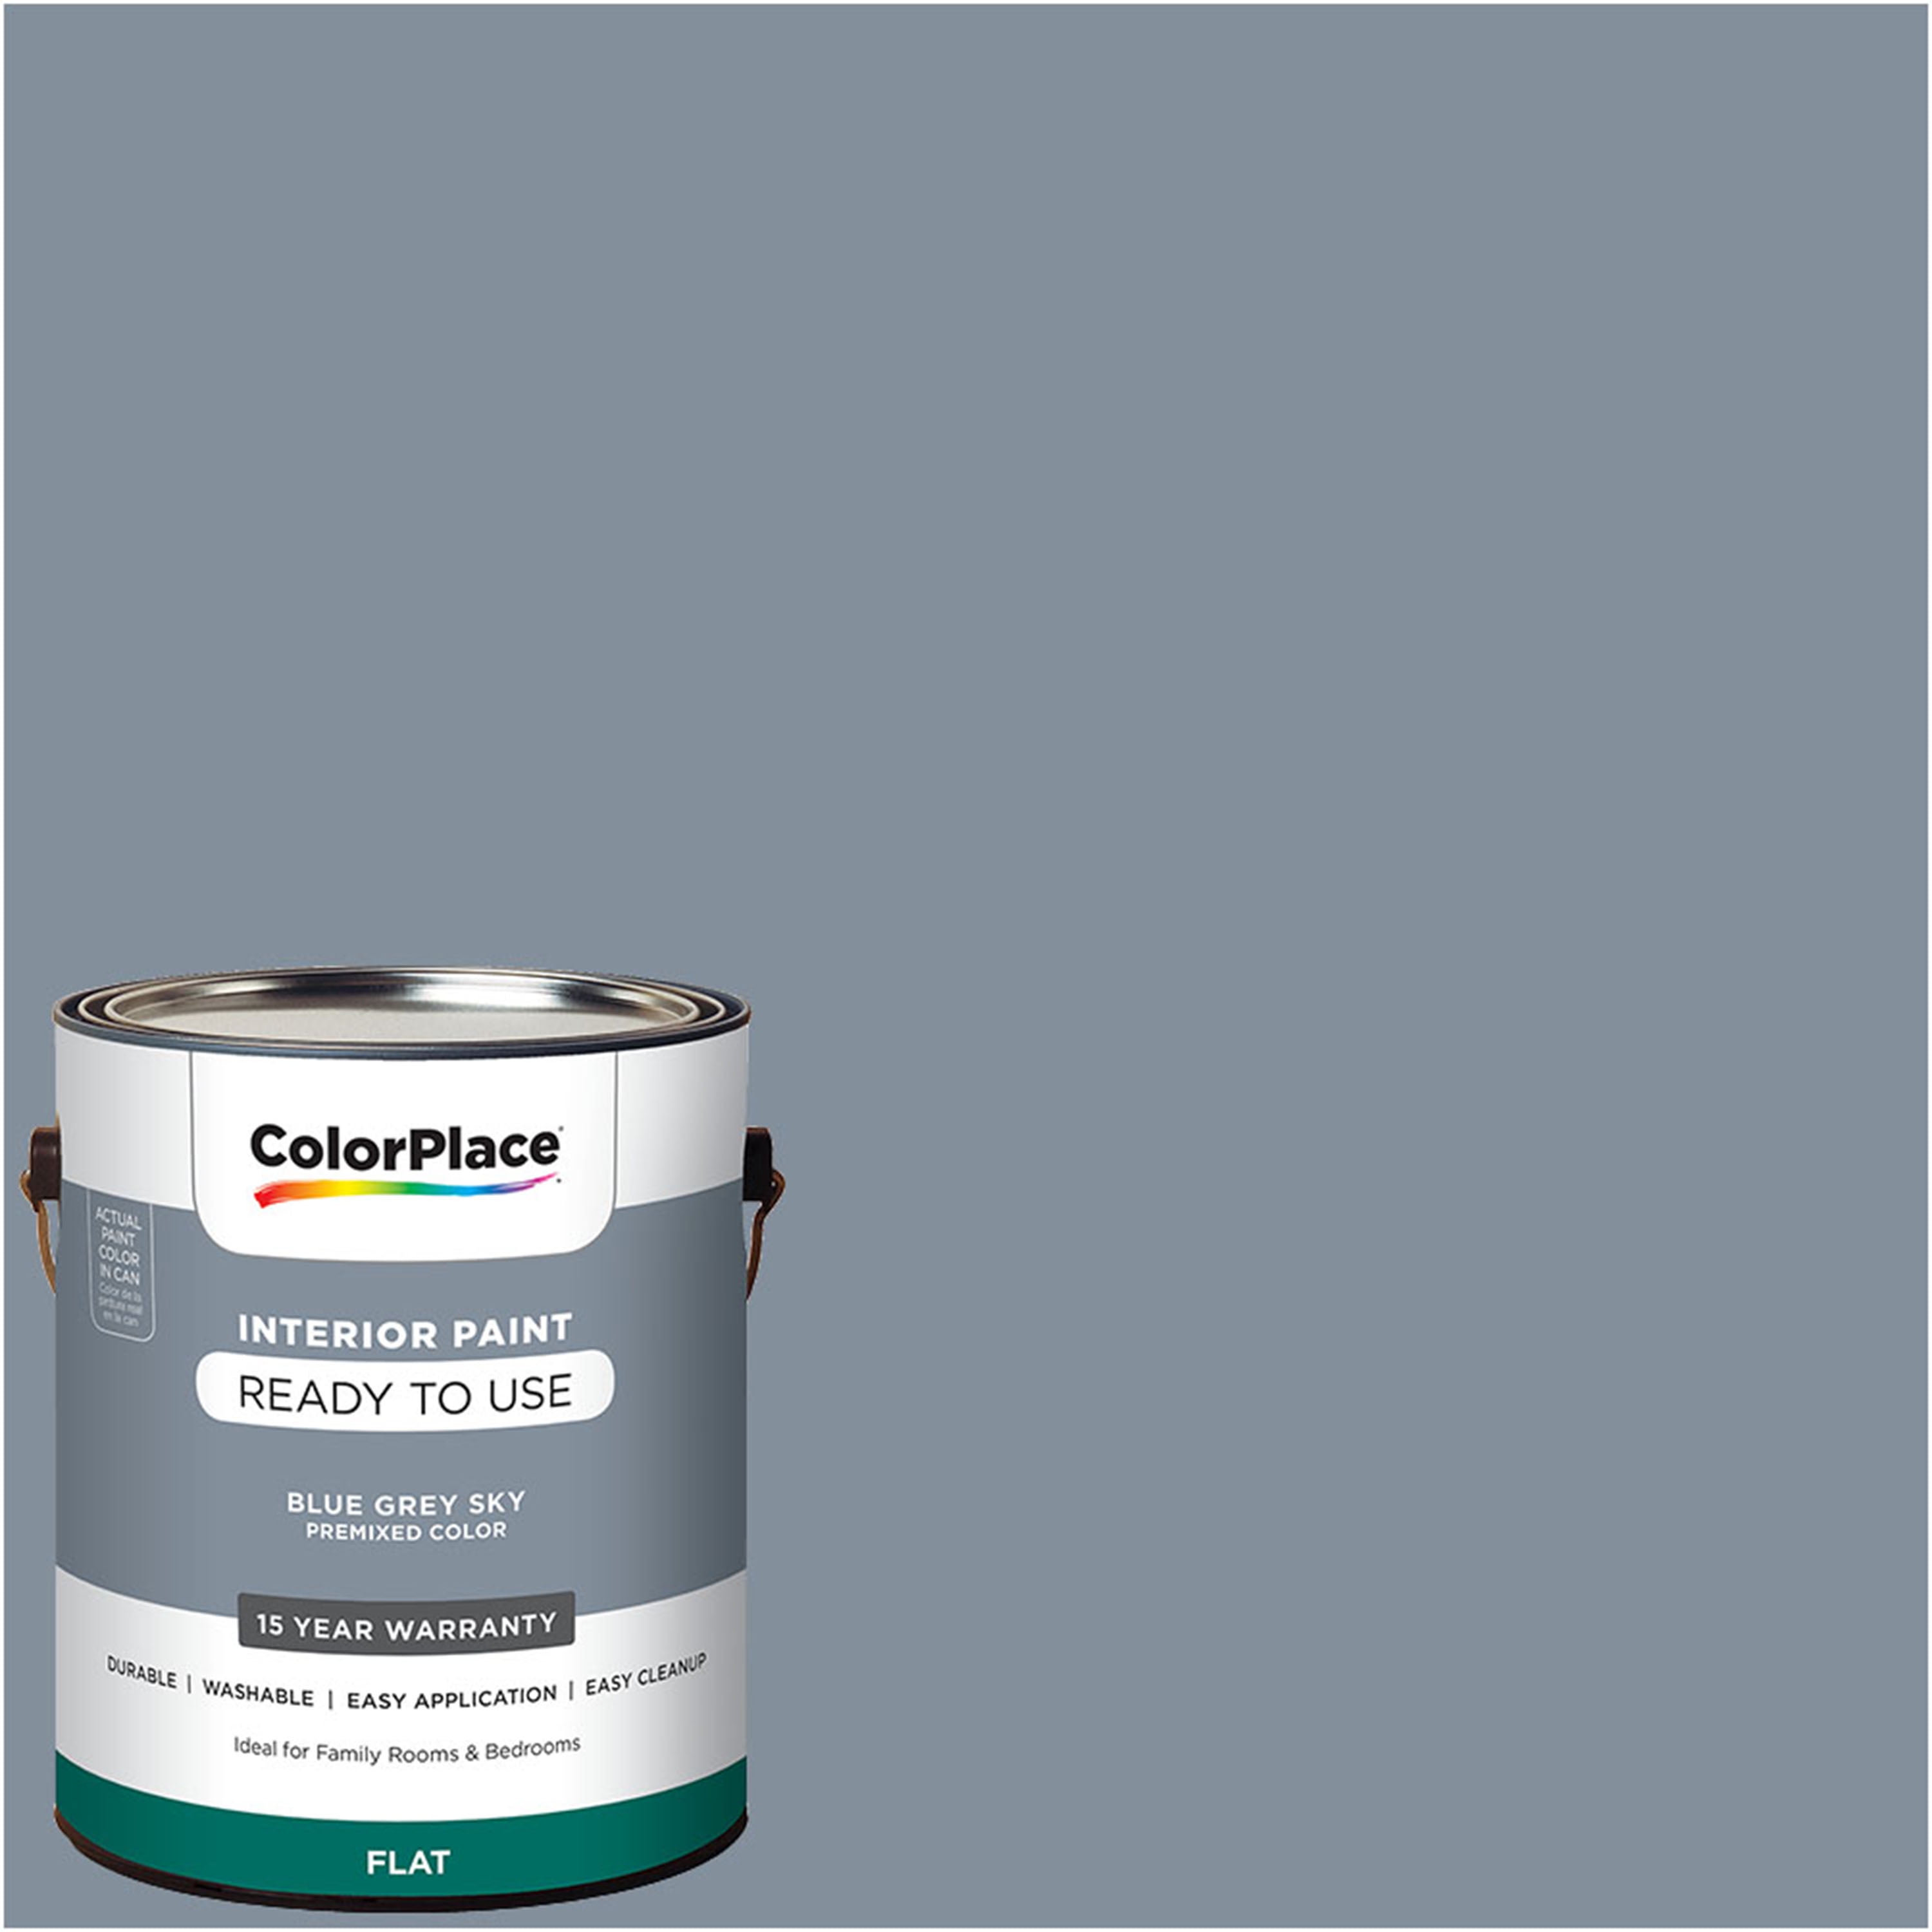 Colorplace Pre Mixed Ready To Use Interior Paint Blue Grey Sky Flat Finish 1 Gallon Walmart Com